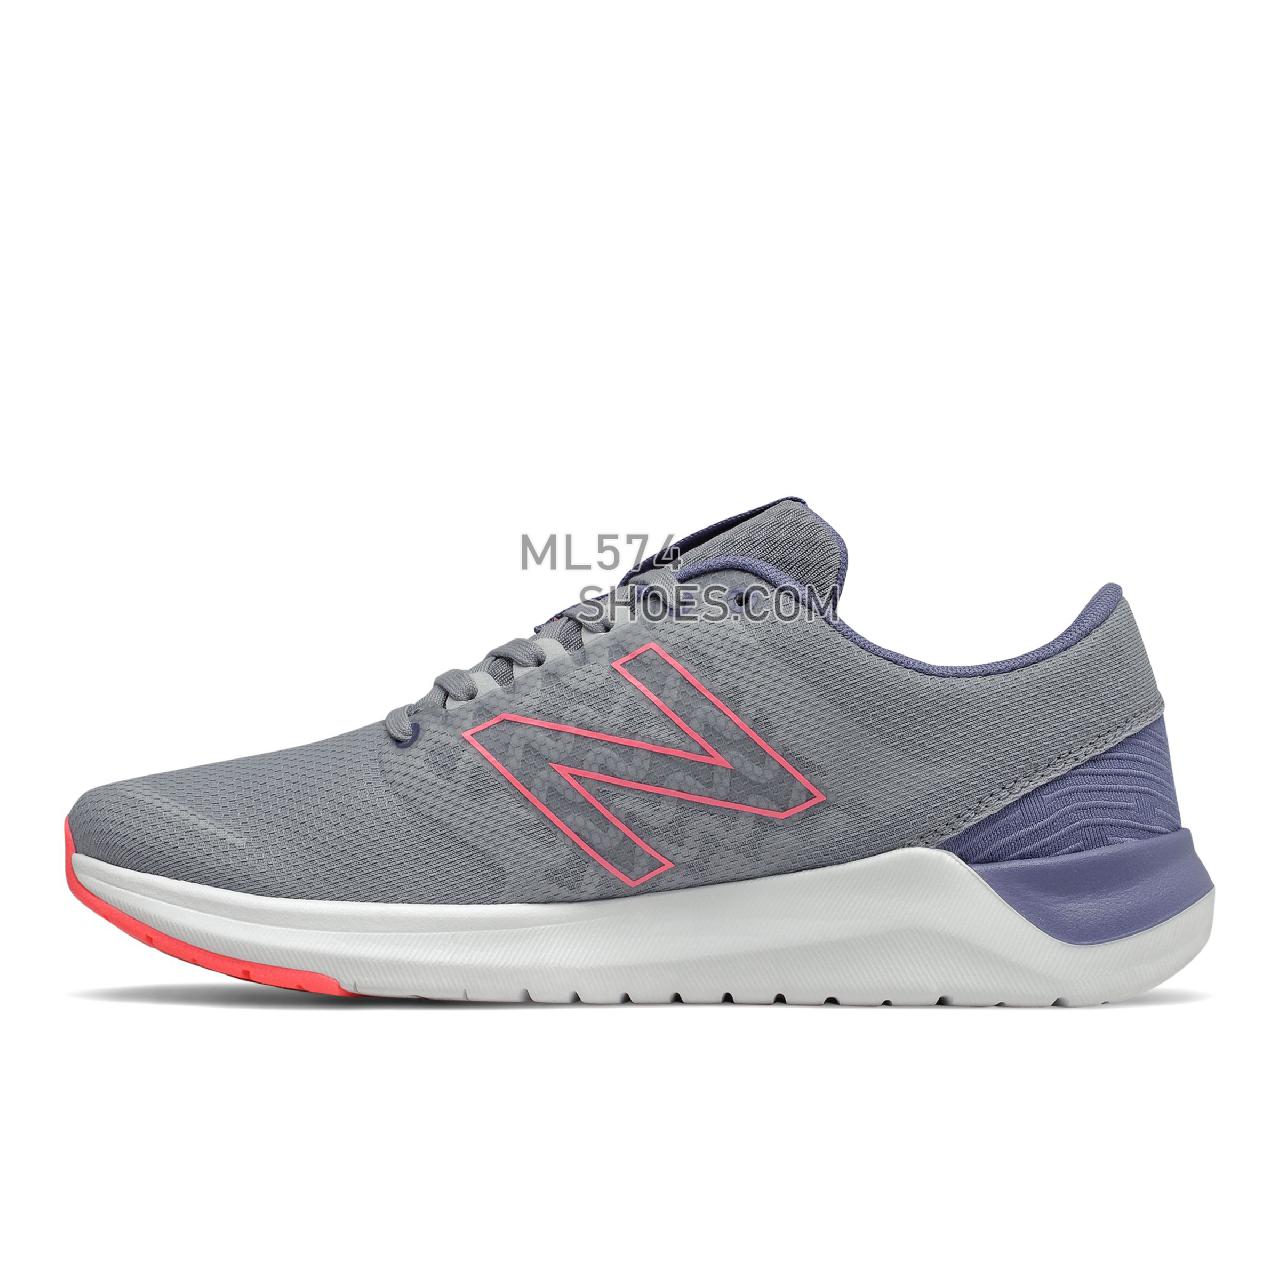 New Balance 715v4 - Women's Workout - Steel with Guava and Magnetic Blue - WX715CG4